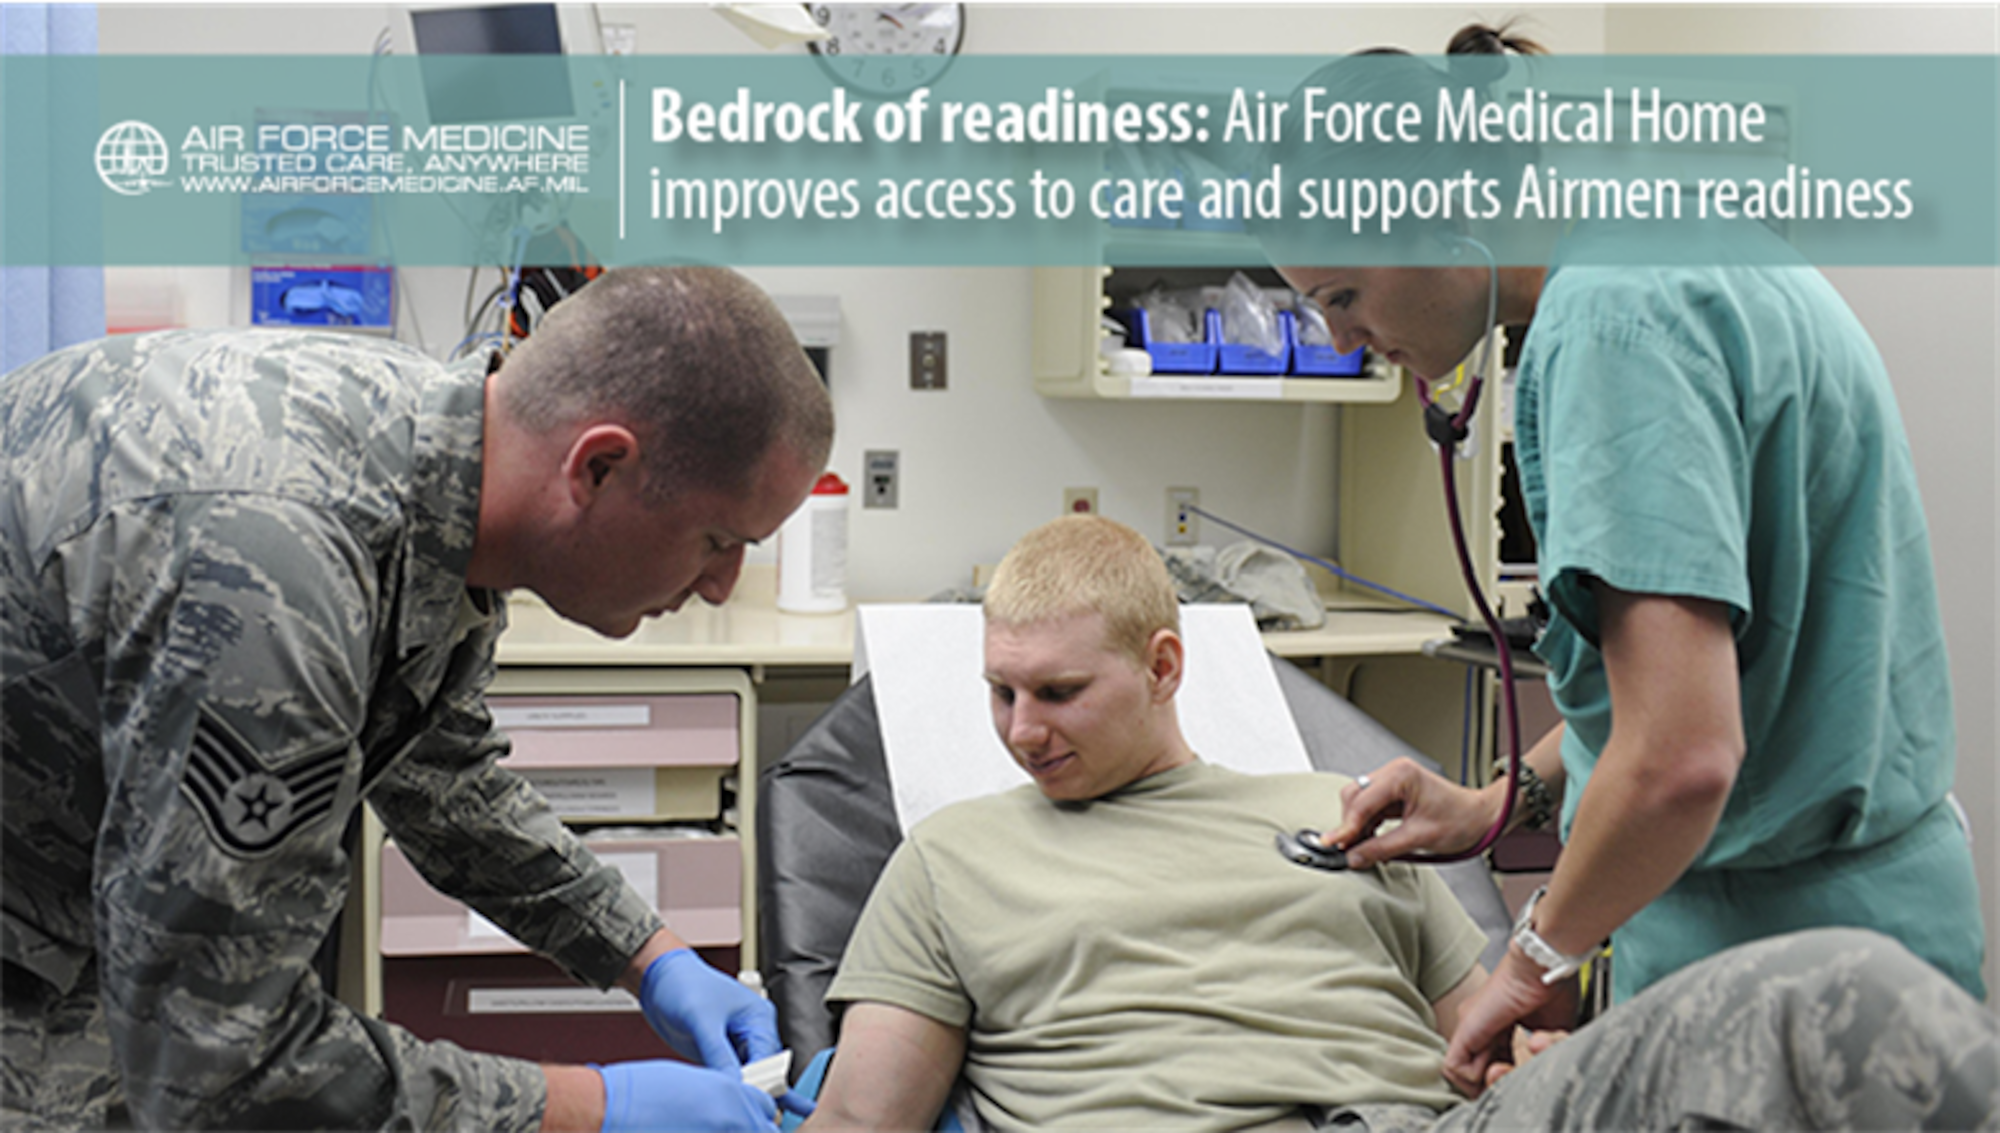 Air Force Medical Home focuses Airmen readiness through improvements on patient access, delivery of quality care, and continued support of mission requirements. (U.S. Air Force graphic)